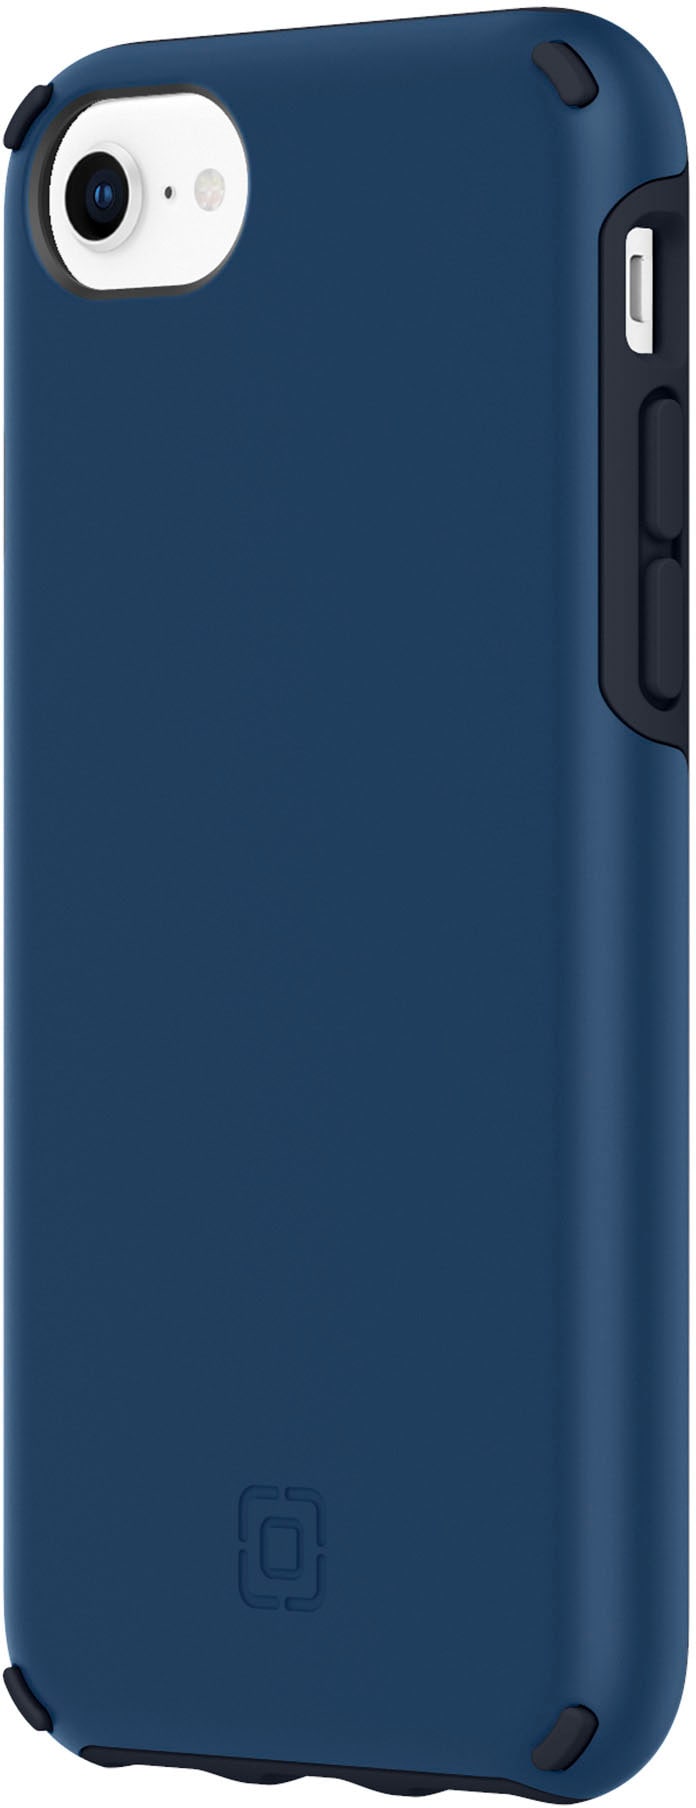 Incipio - Duo Hard shell Case for Apple iPhone SE (3rd Generation) and iPhone 8/7/6/6s - Blue_1